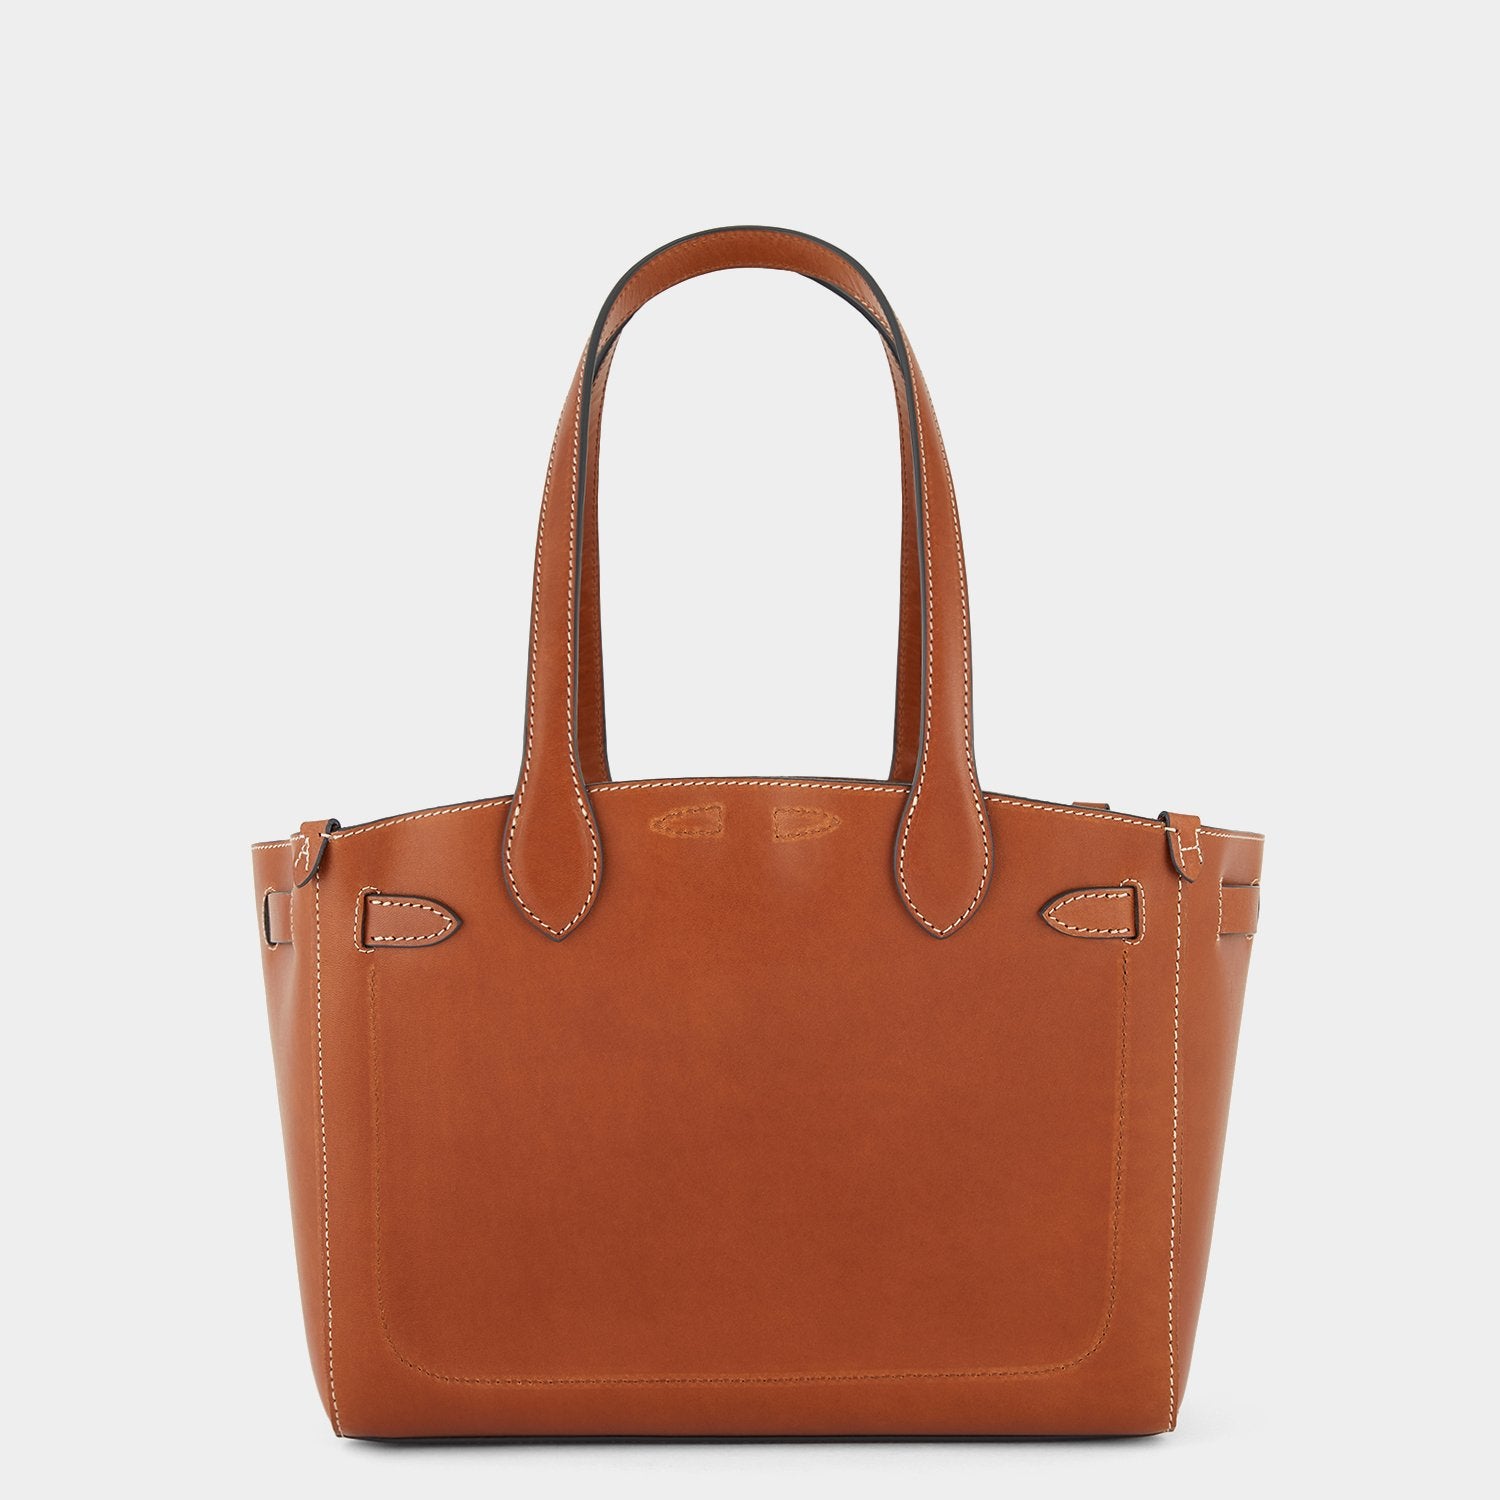 「Return to Nature」 トート スモール -

                  
                    Compostable Leather in Tan -
                  

                  Anya Hindmarch JP
